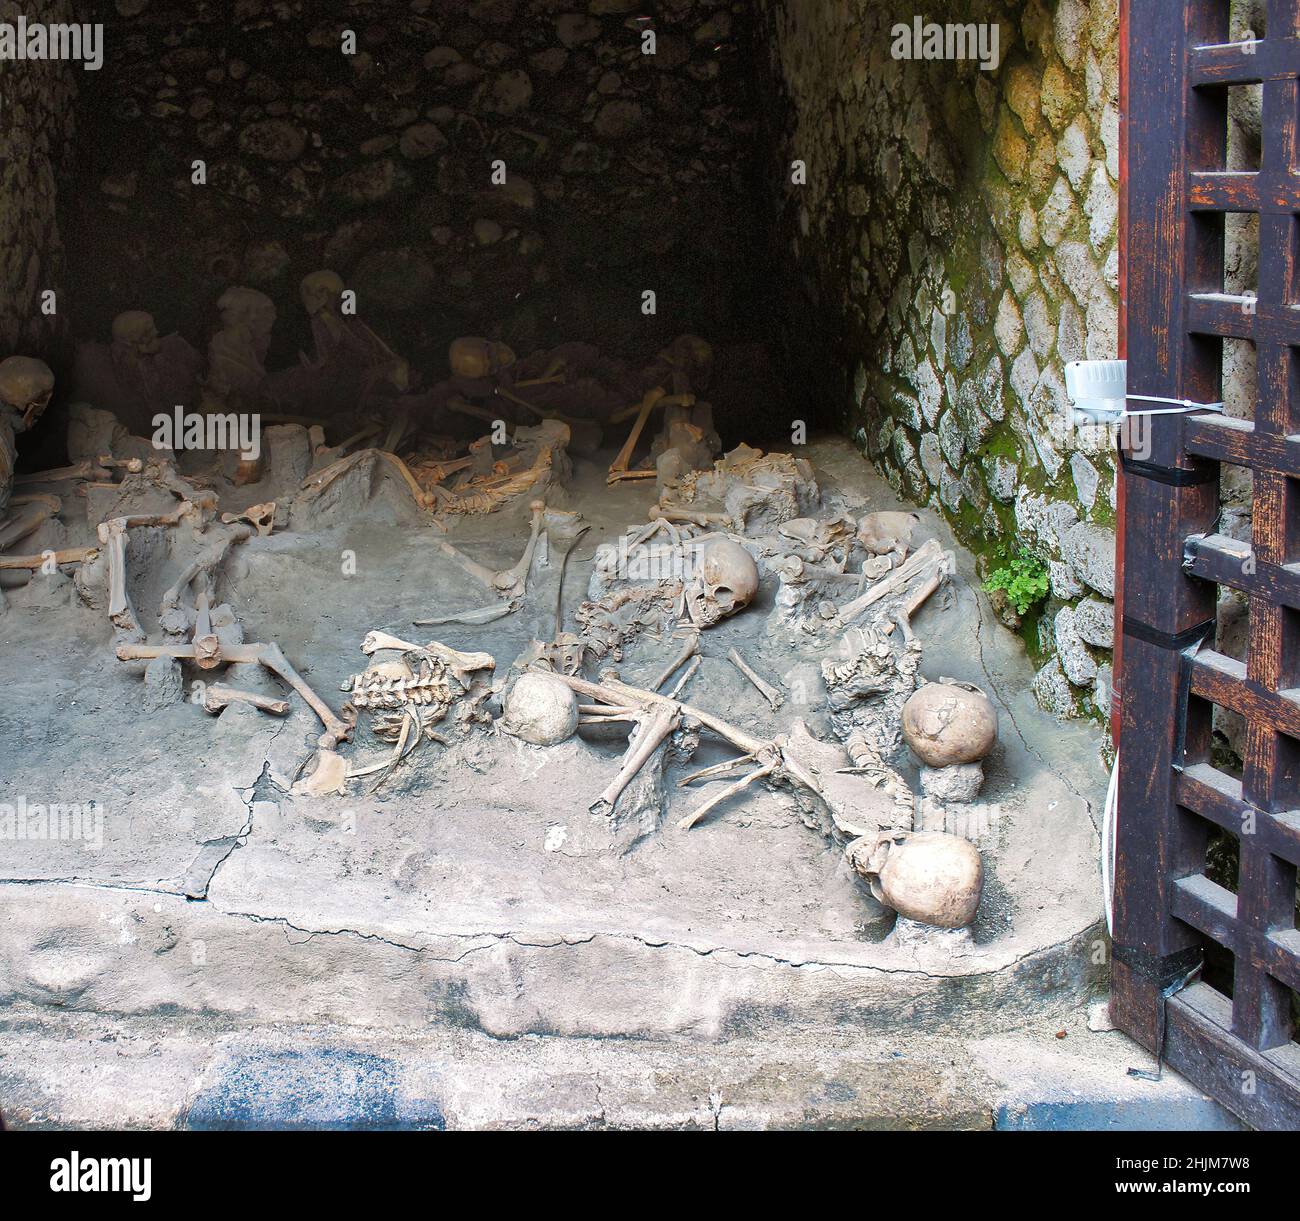 Remains of human skeletons victims of the eruption of Vesuvius that destroyed Pompeii and Herculaneum in 79AD Stock Photo